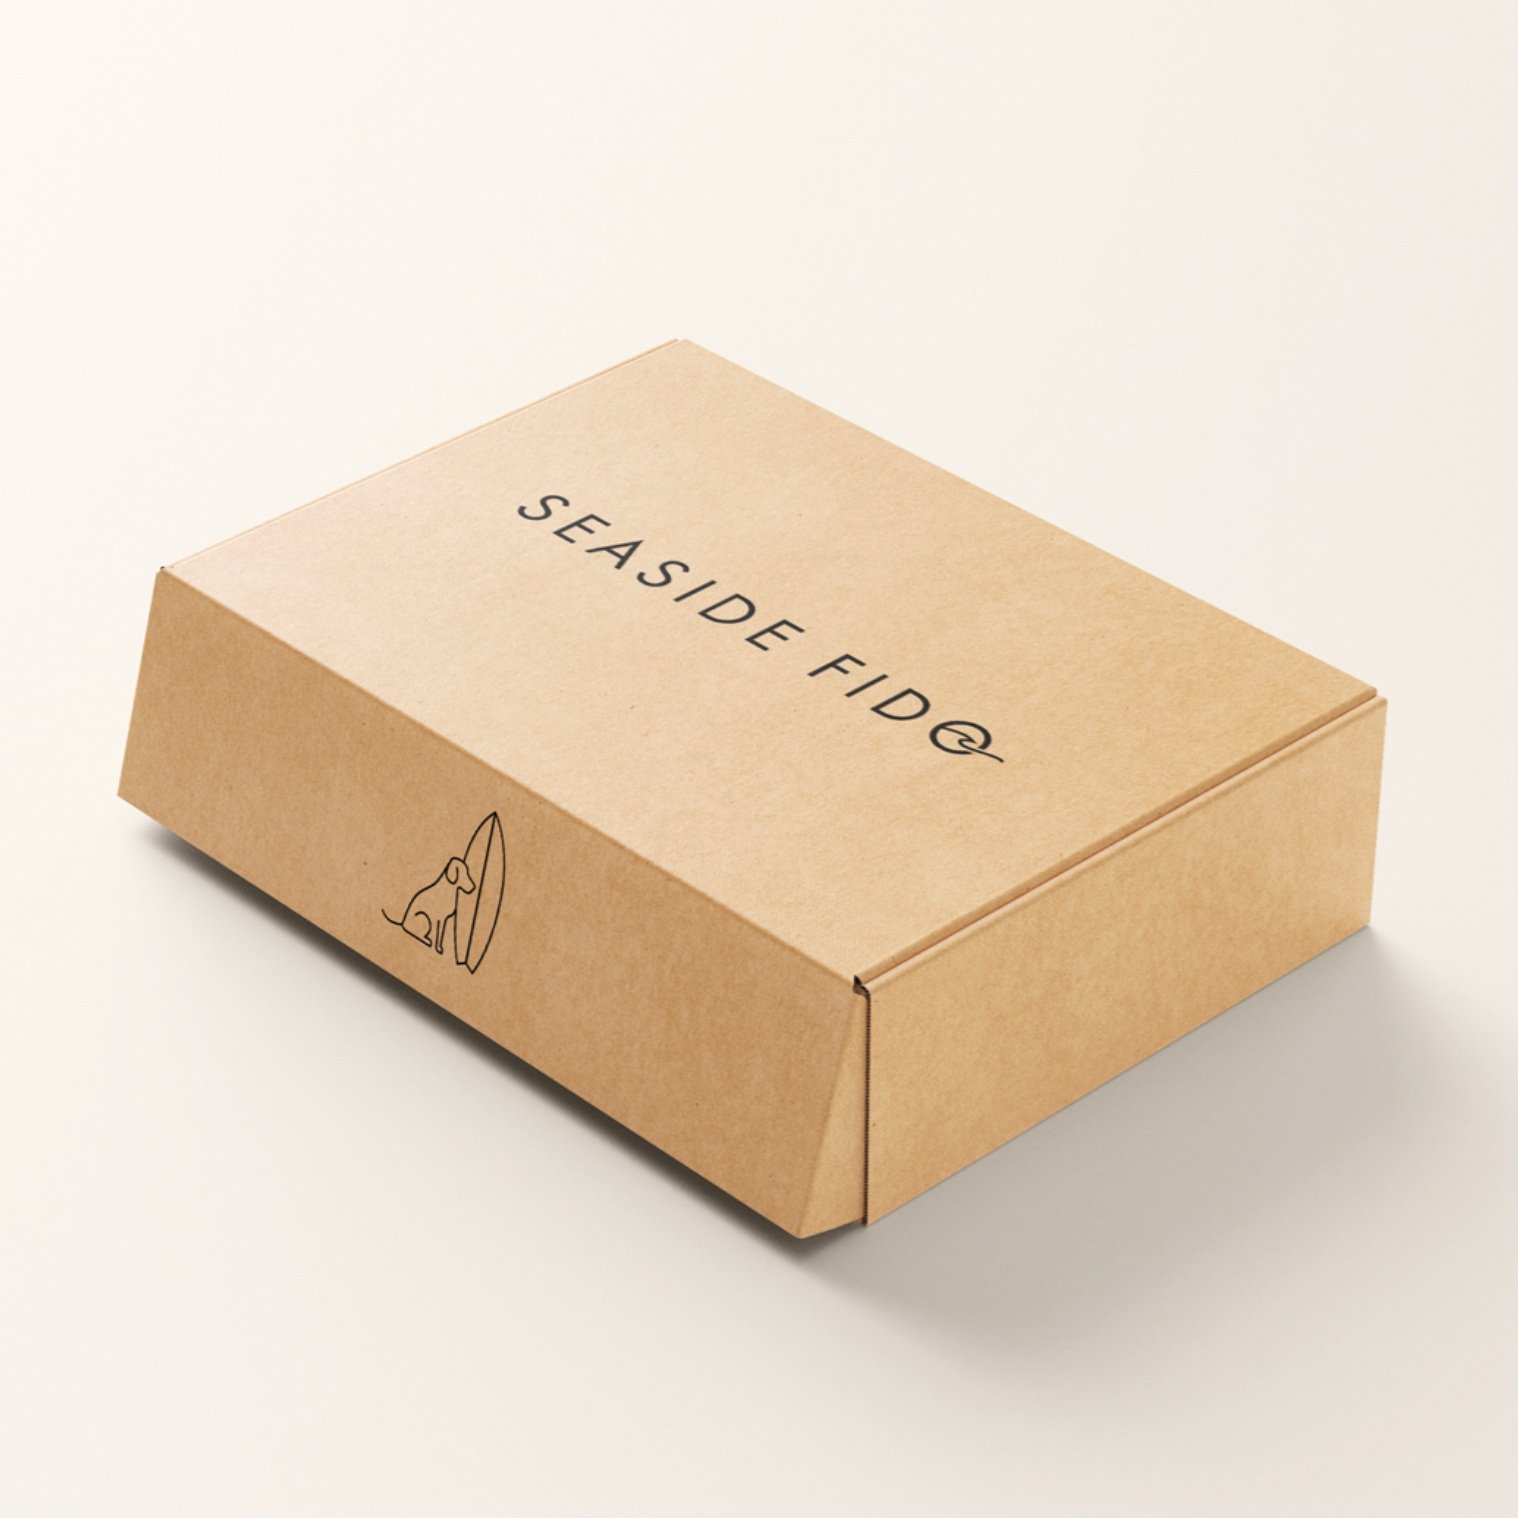 Minimal+Eco+Friendly+Packaging+Design+Little+and+Create.jpg